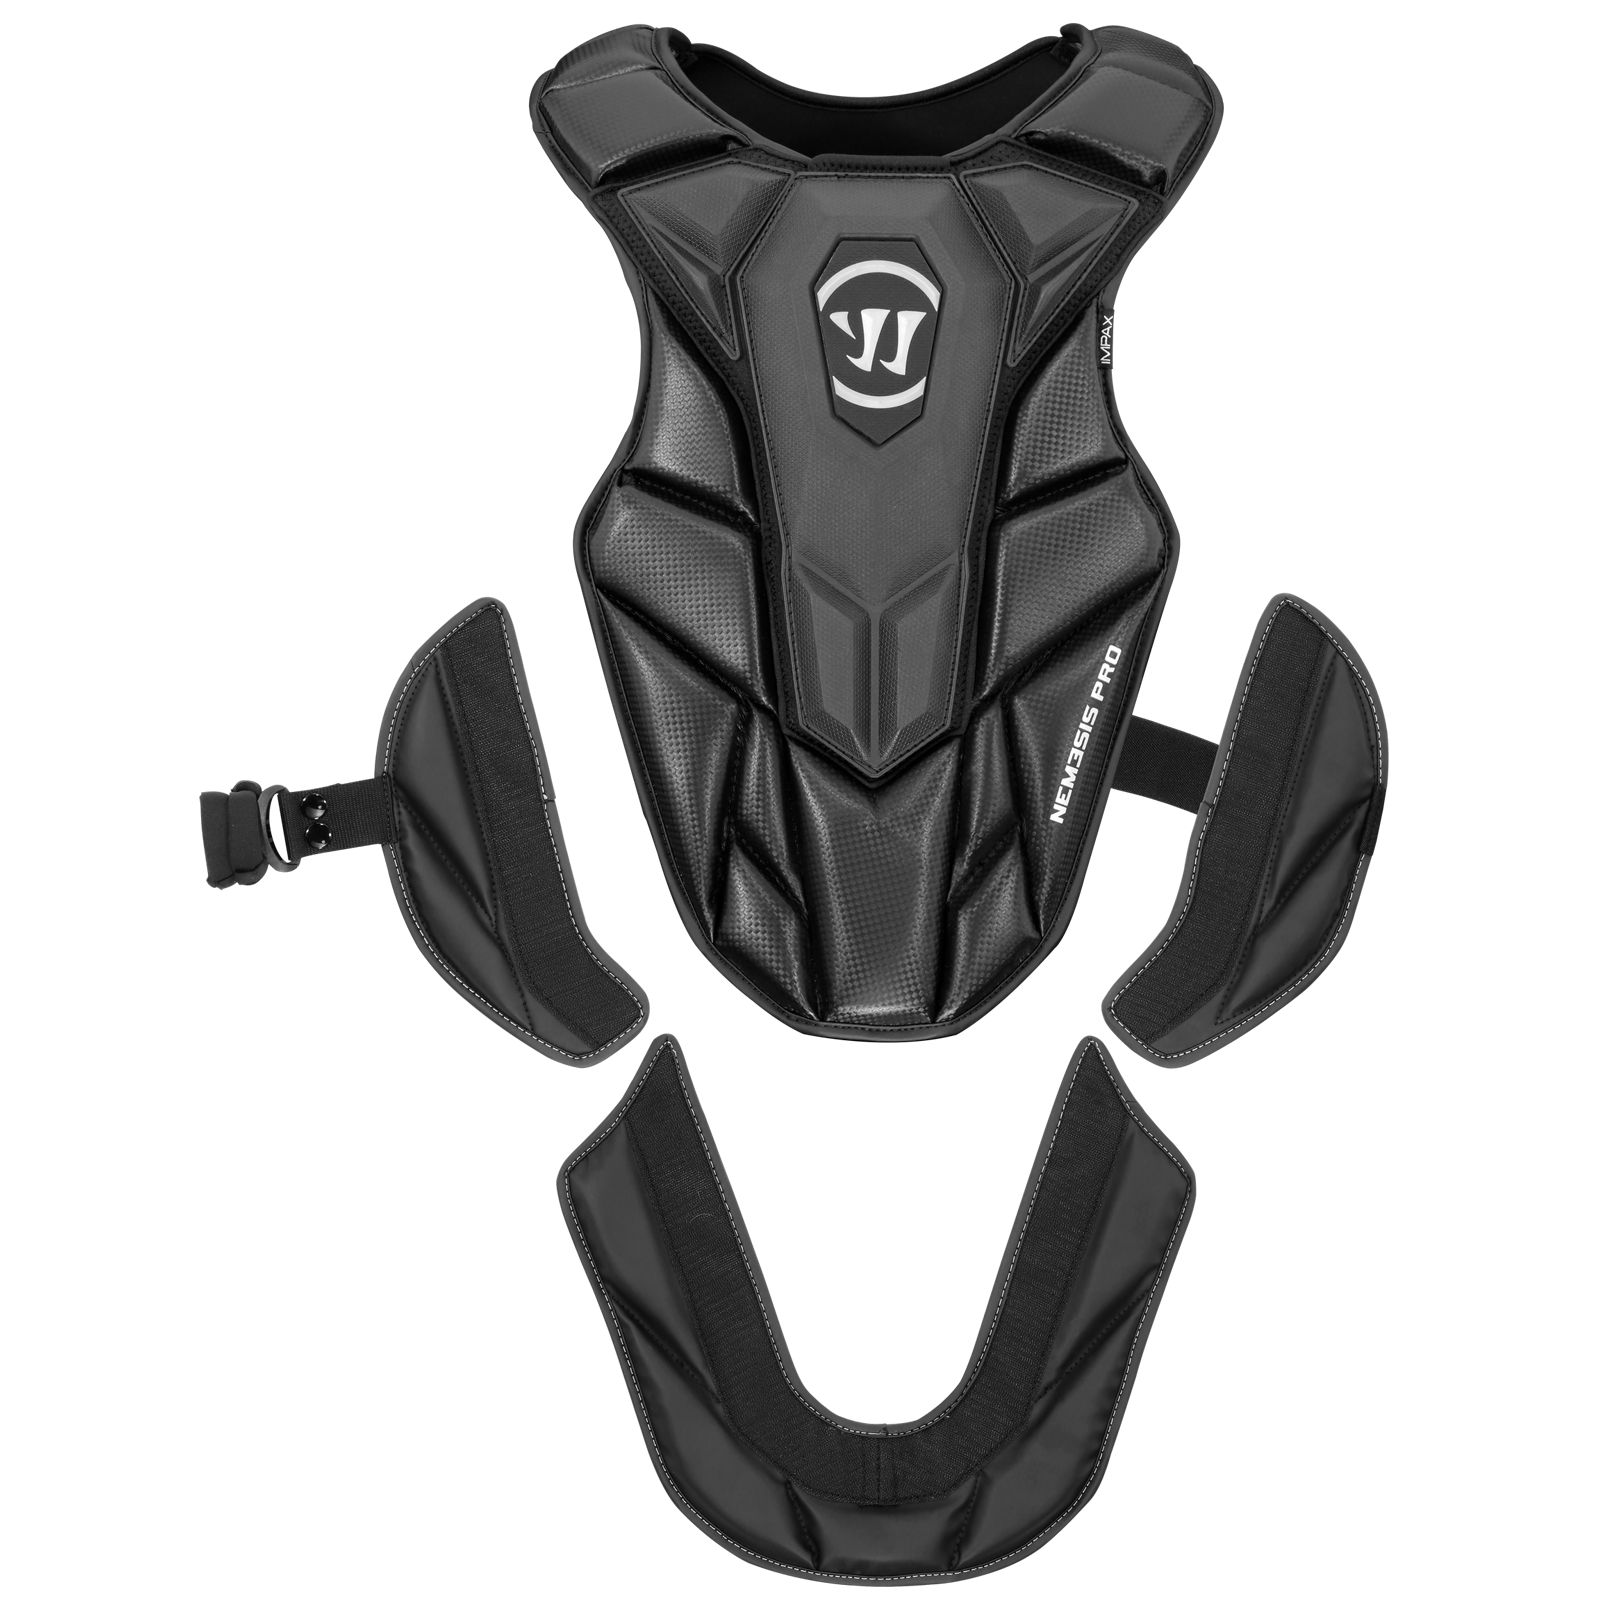 Nemesis Pro Chest Protector, Black image number 2